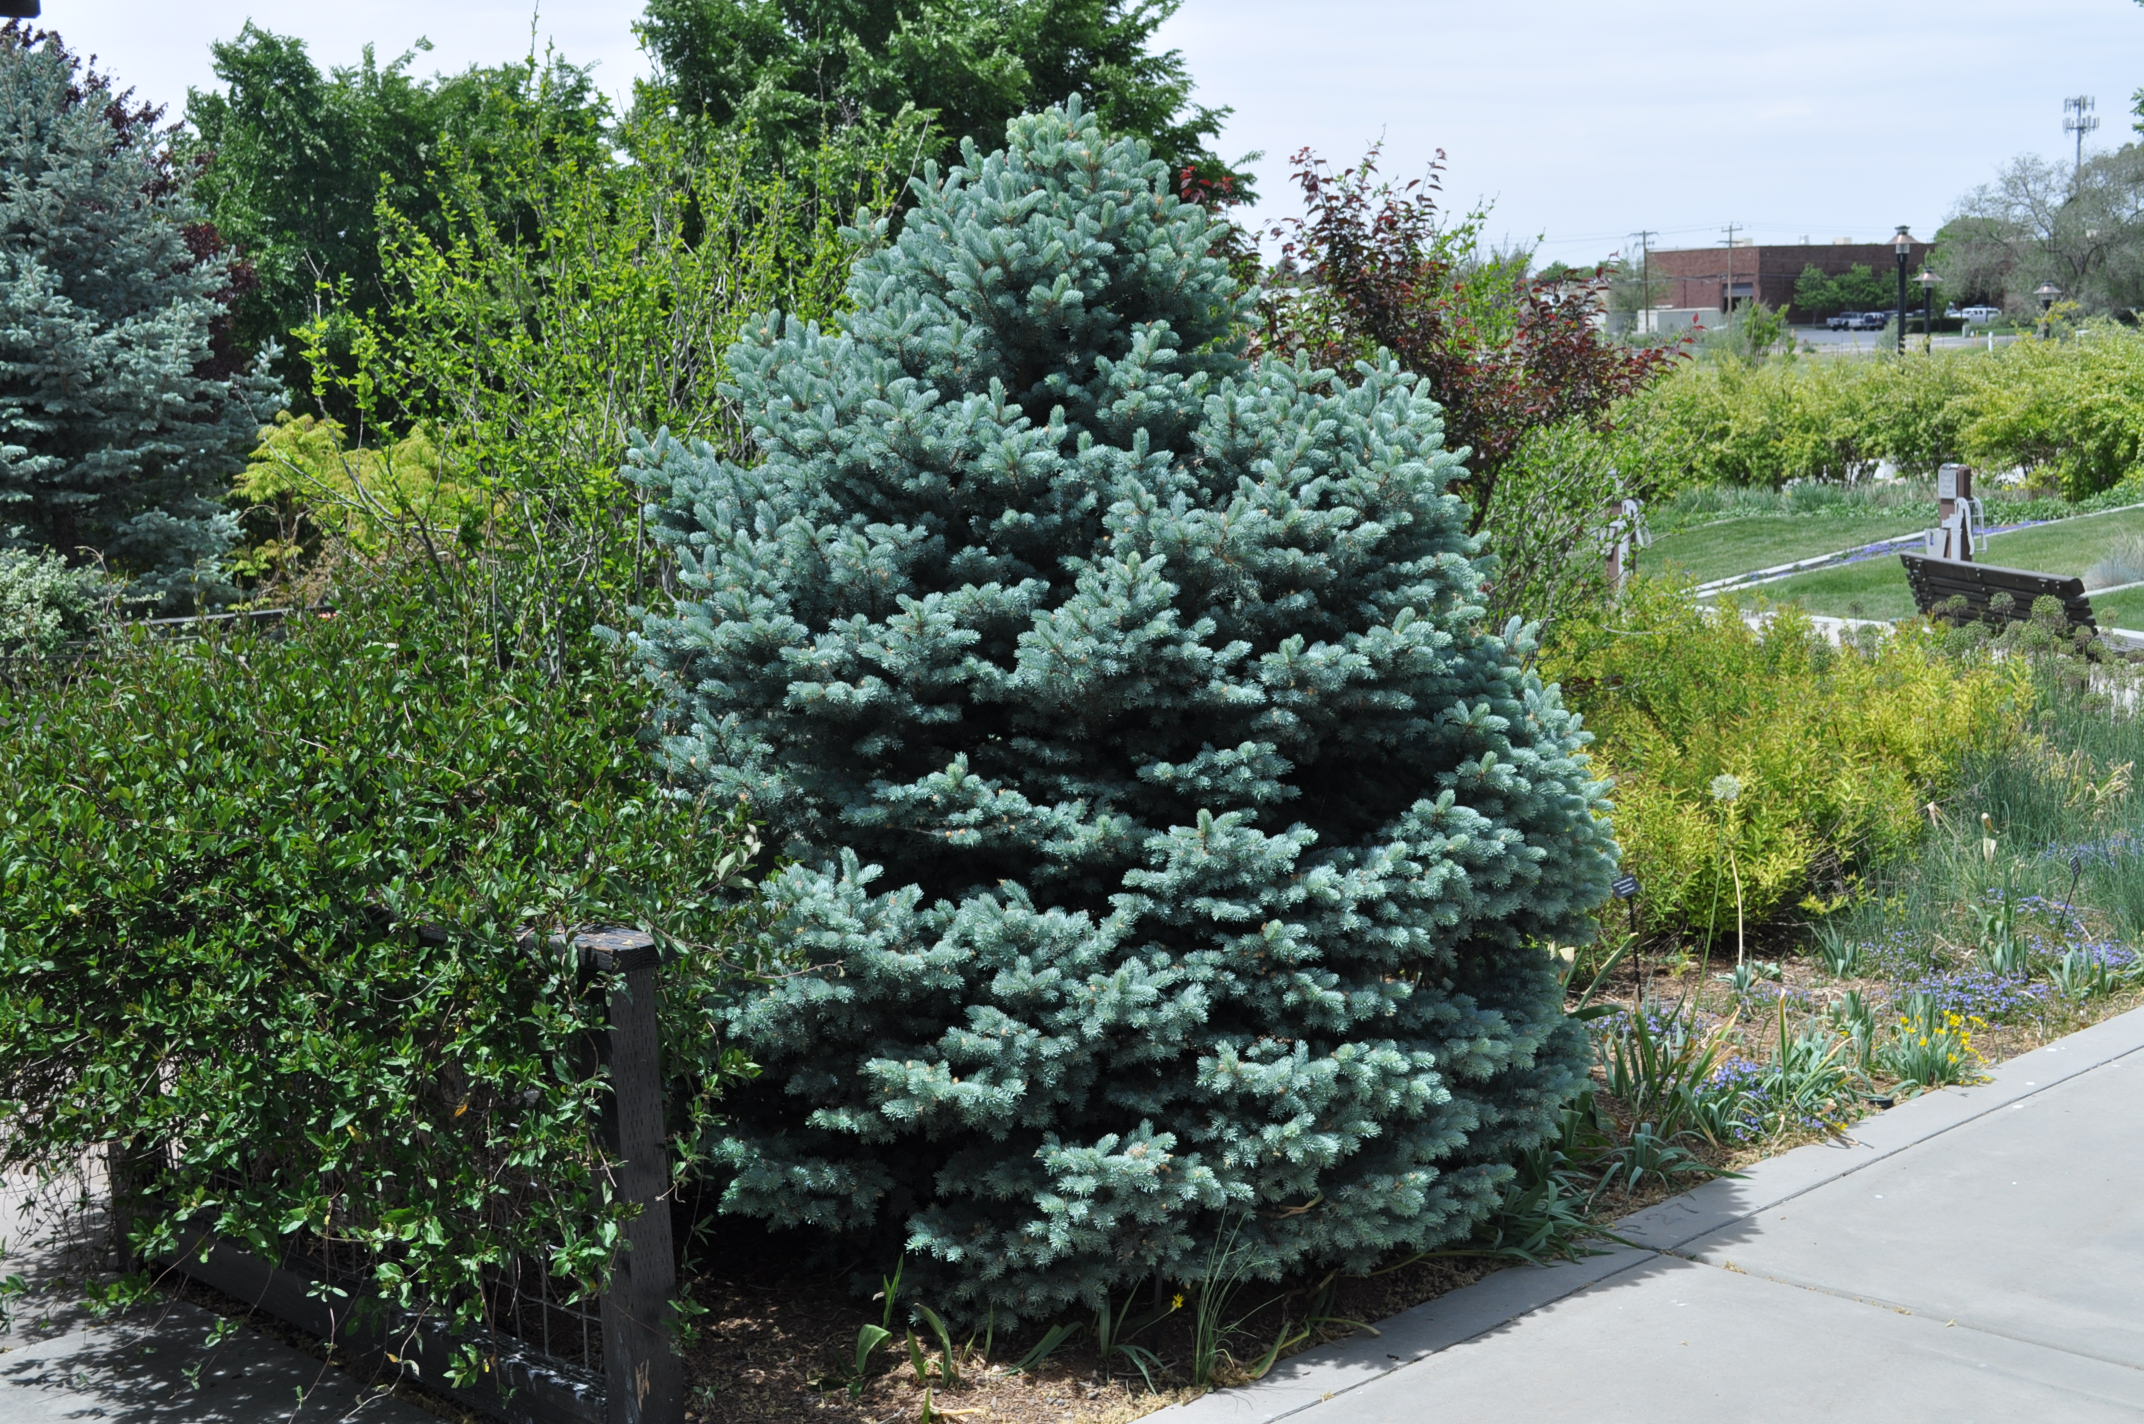 https://conservationgardenpark.org/file/03f46952-8664-4705-a387-fb08c81cde42/Picea-pungens-Montgomery---Montgomery-Blue-Spruce-2-.JPG